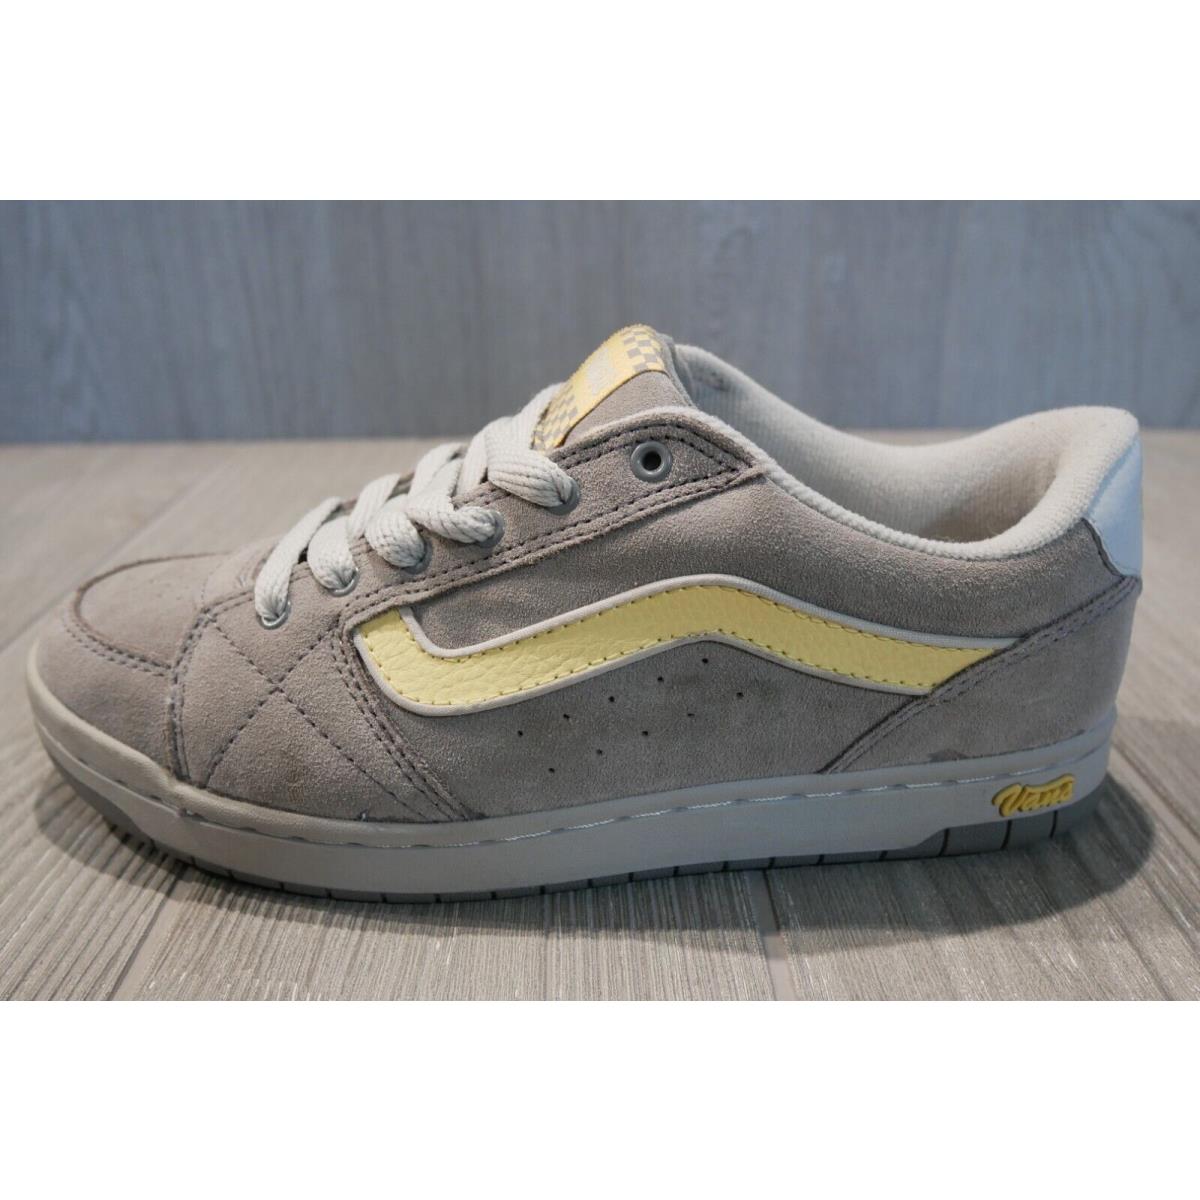 Vintage Vans Gia Grey Yellow Suede 2004 Skate Shoes Womens 8 Oss